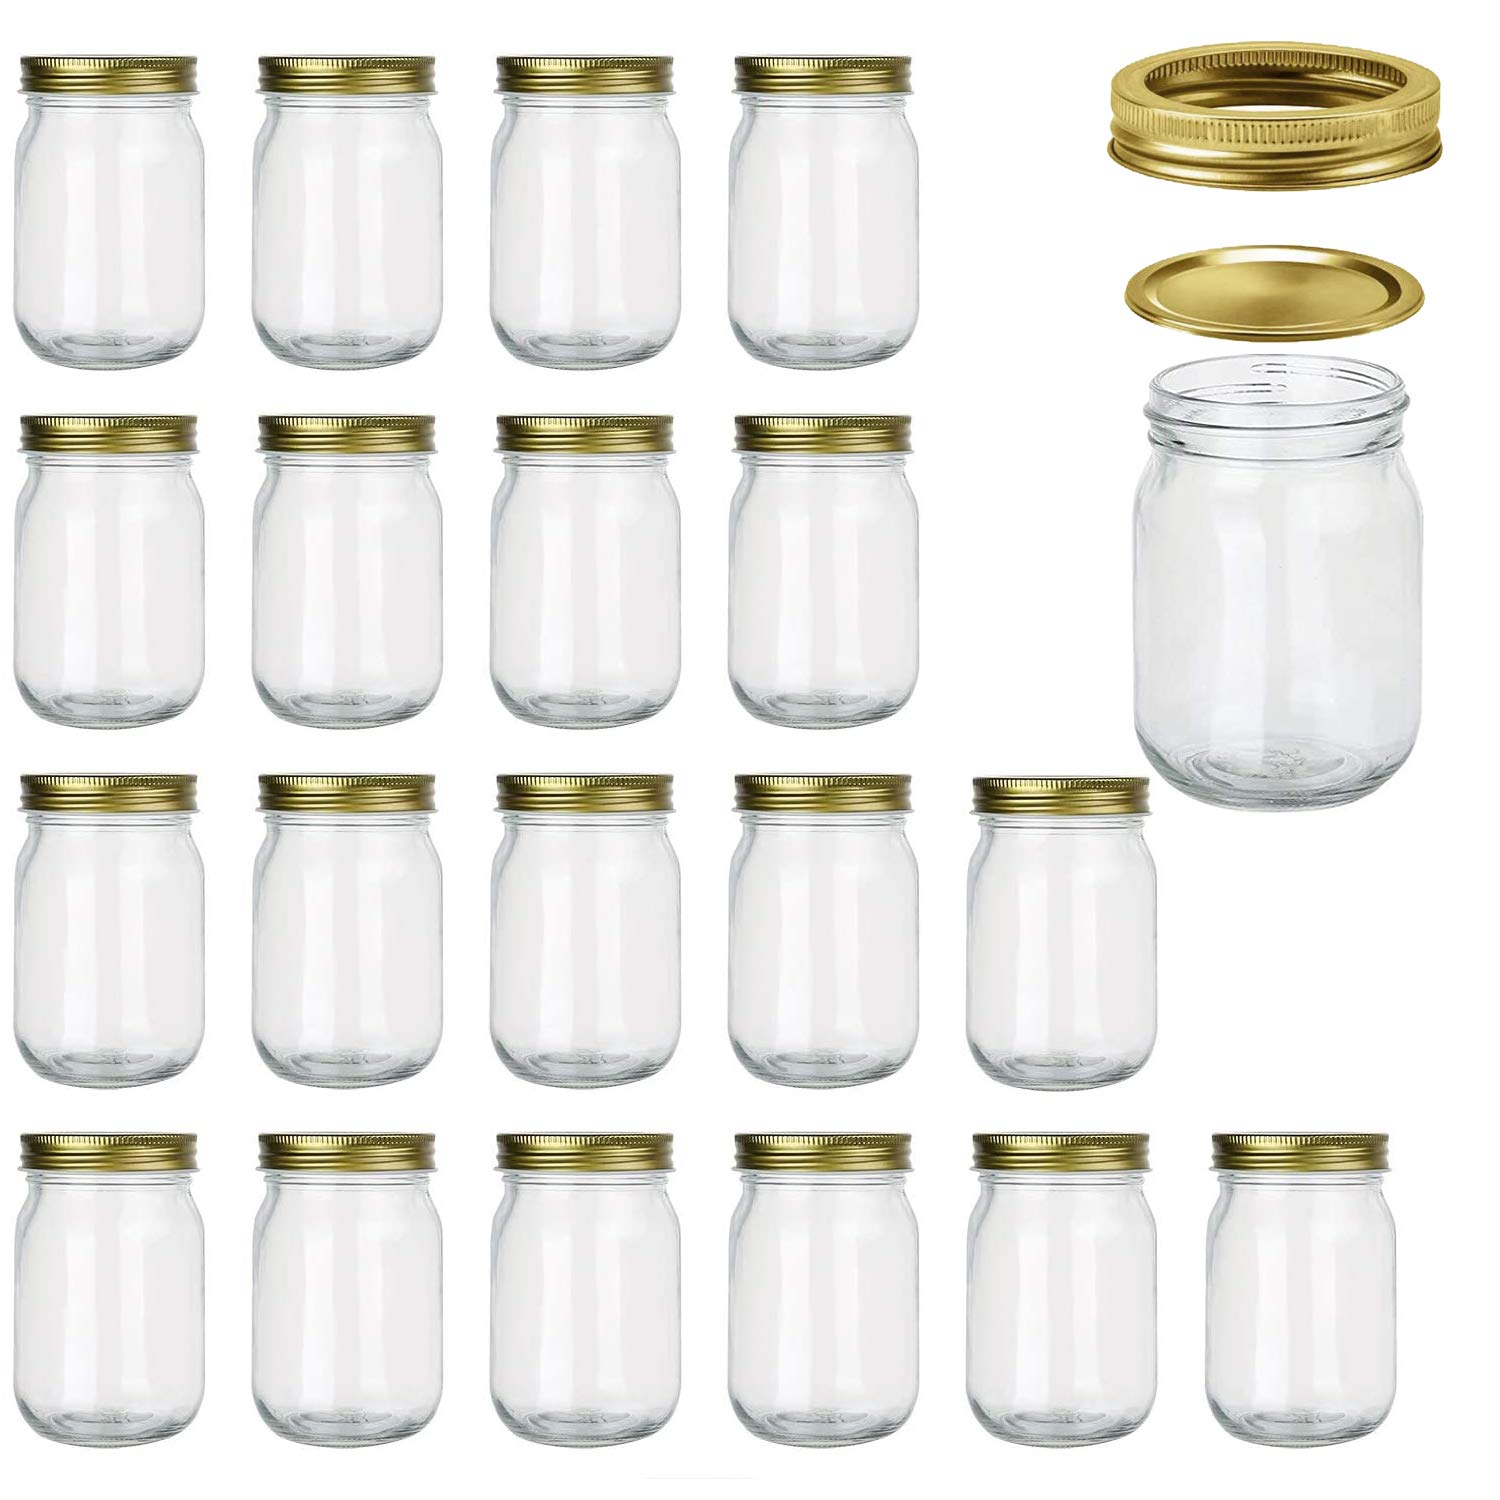 Encheng 12 oz Glass Jars With Lids And Bands,Ball Wide Mouth Mason Jars For Storage,Canning Jars For Caviar,Herb,Jelly,Jams,Honey,Dishware Safe,Spi...